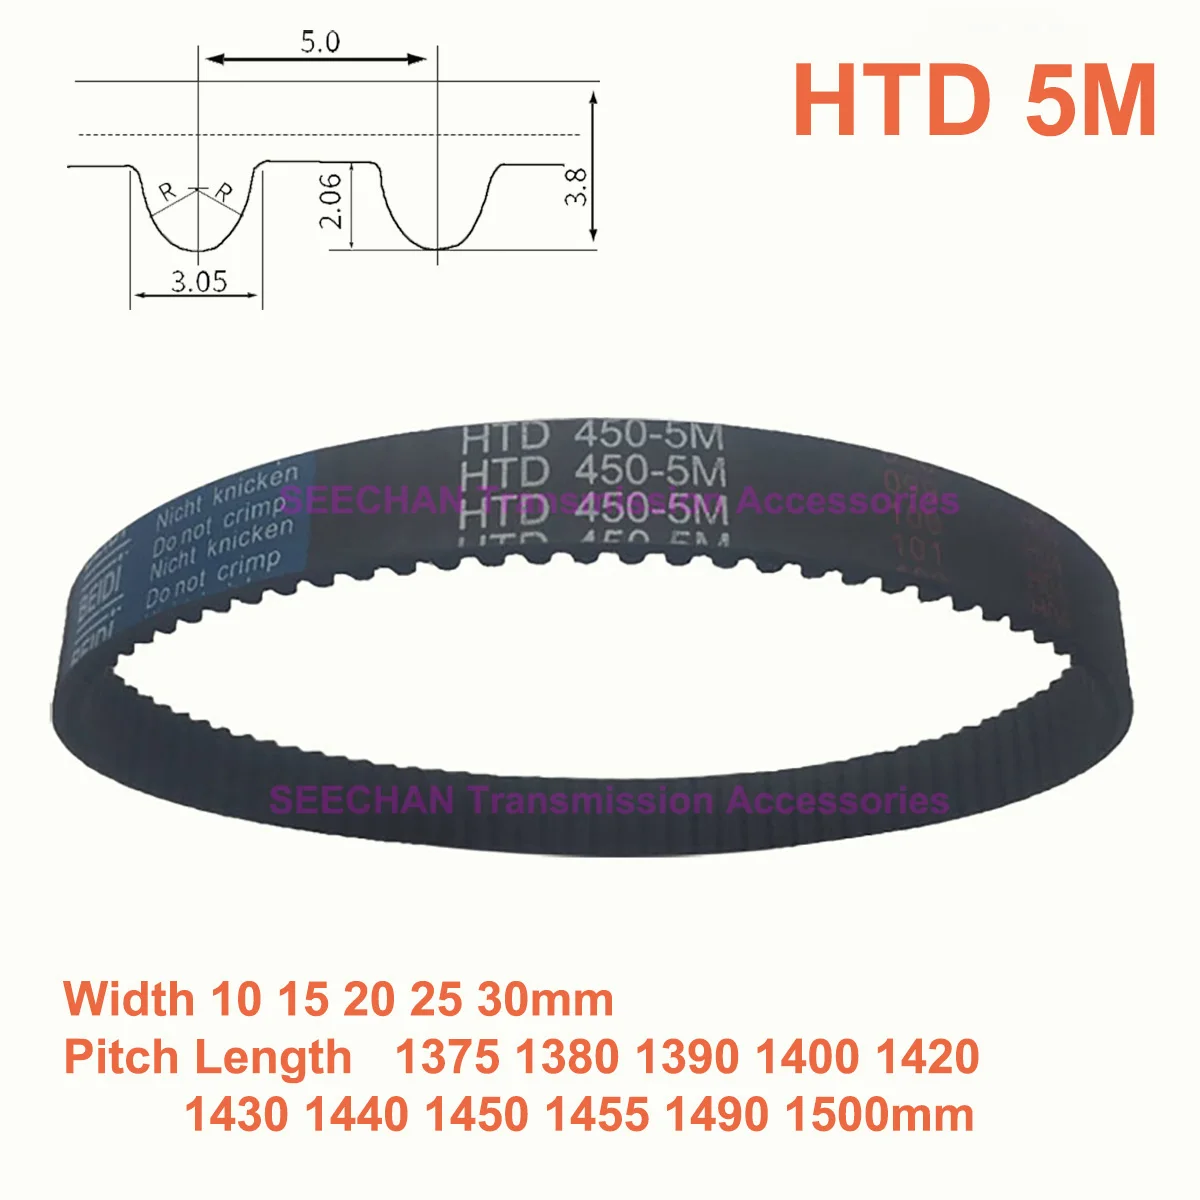 

HTD 5M Rubber Synchronous Timing Belt Width 10 15 20 25 30mm Perimeter 1375 1380 1390 1400 1420 1430 1440 1450 1455 1490 1500mm